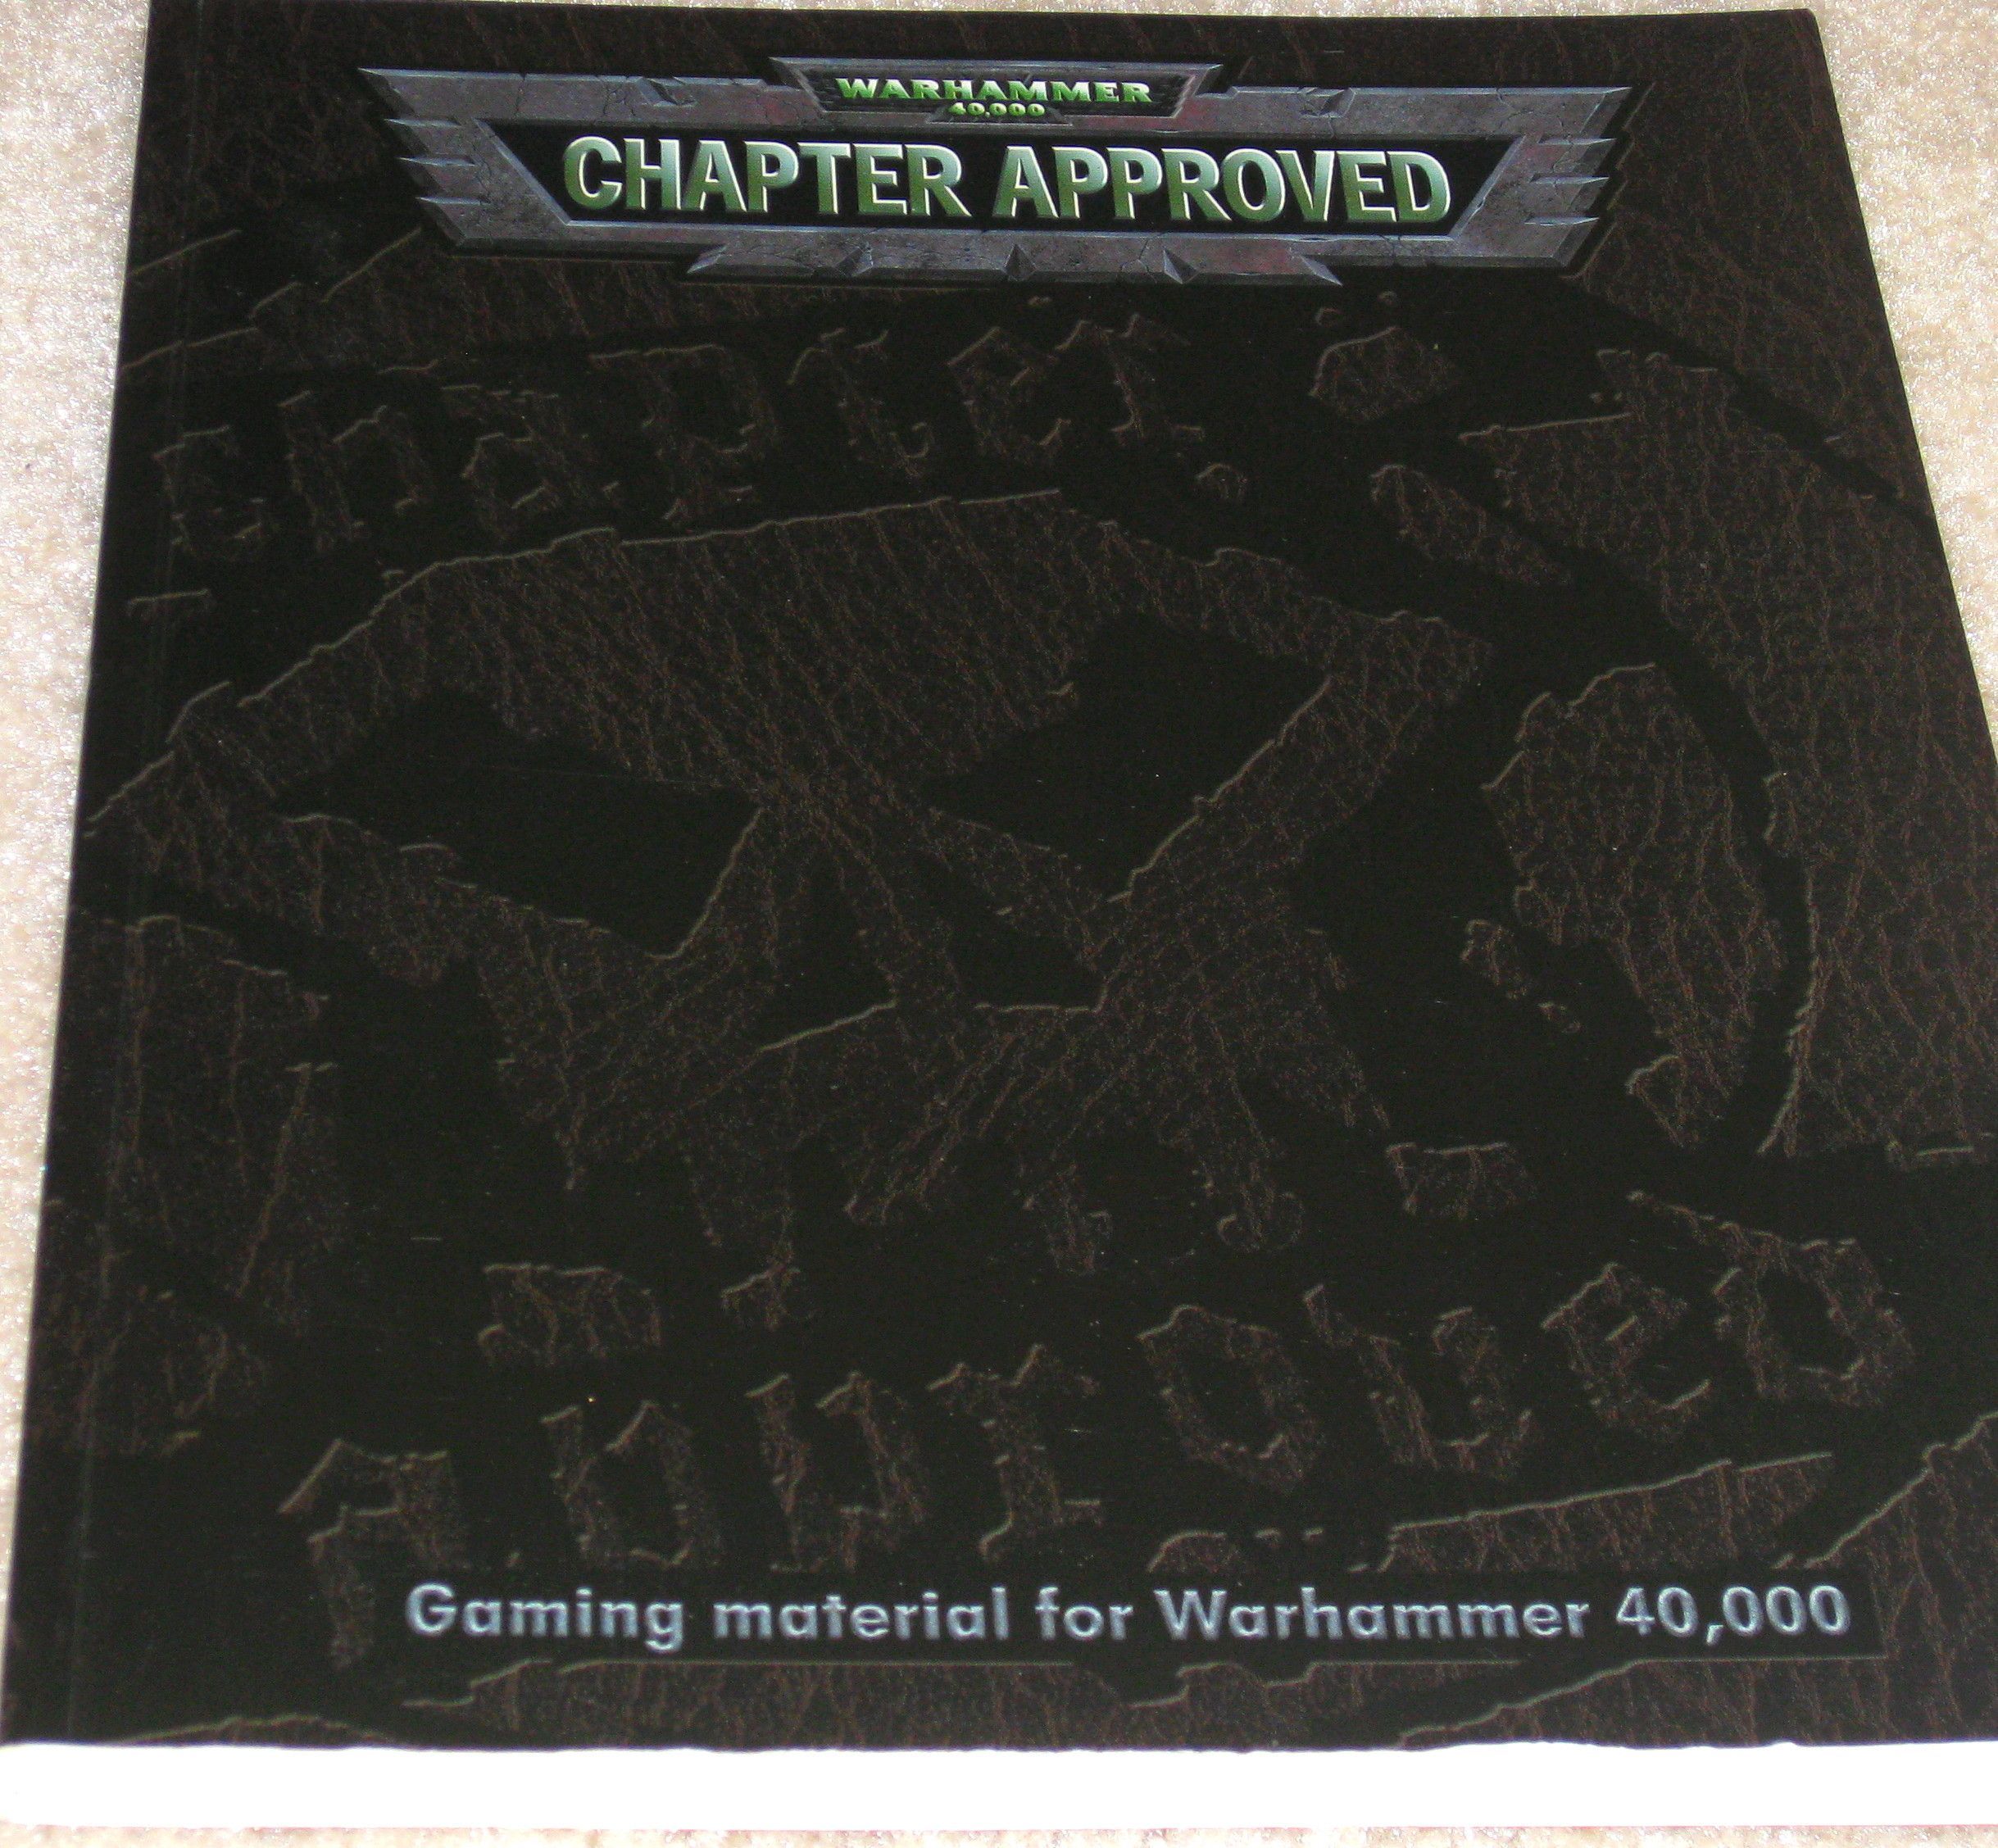 Warhammer 40,000: Chapter Approved